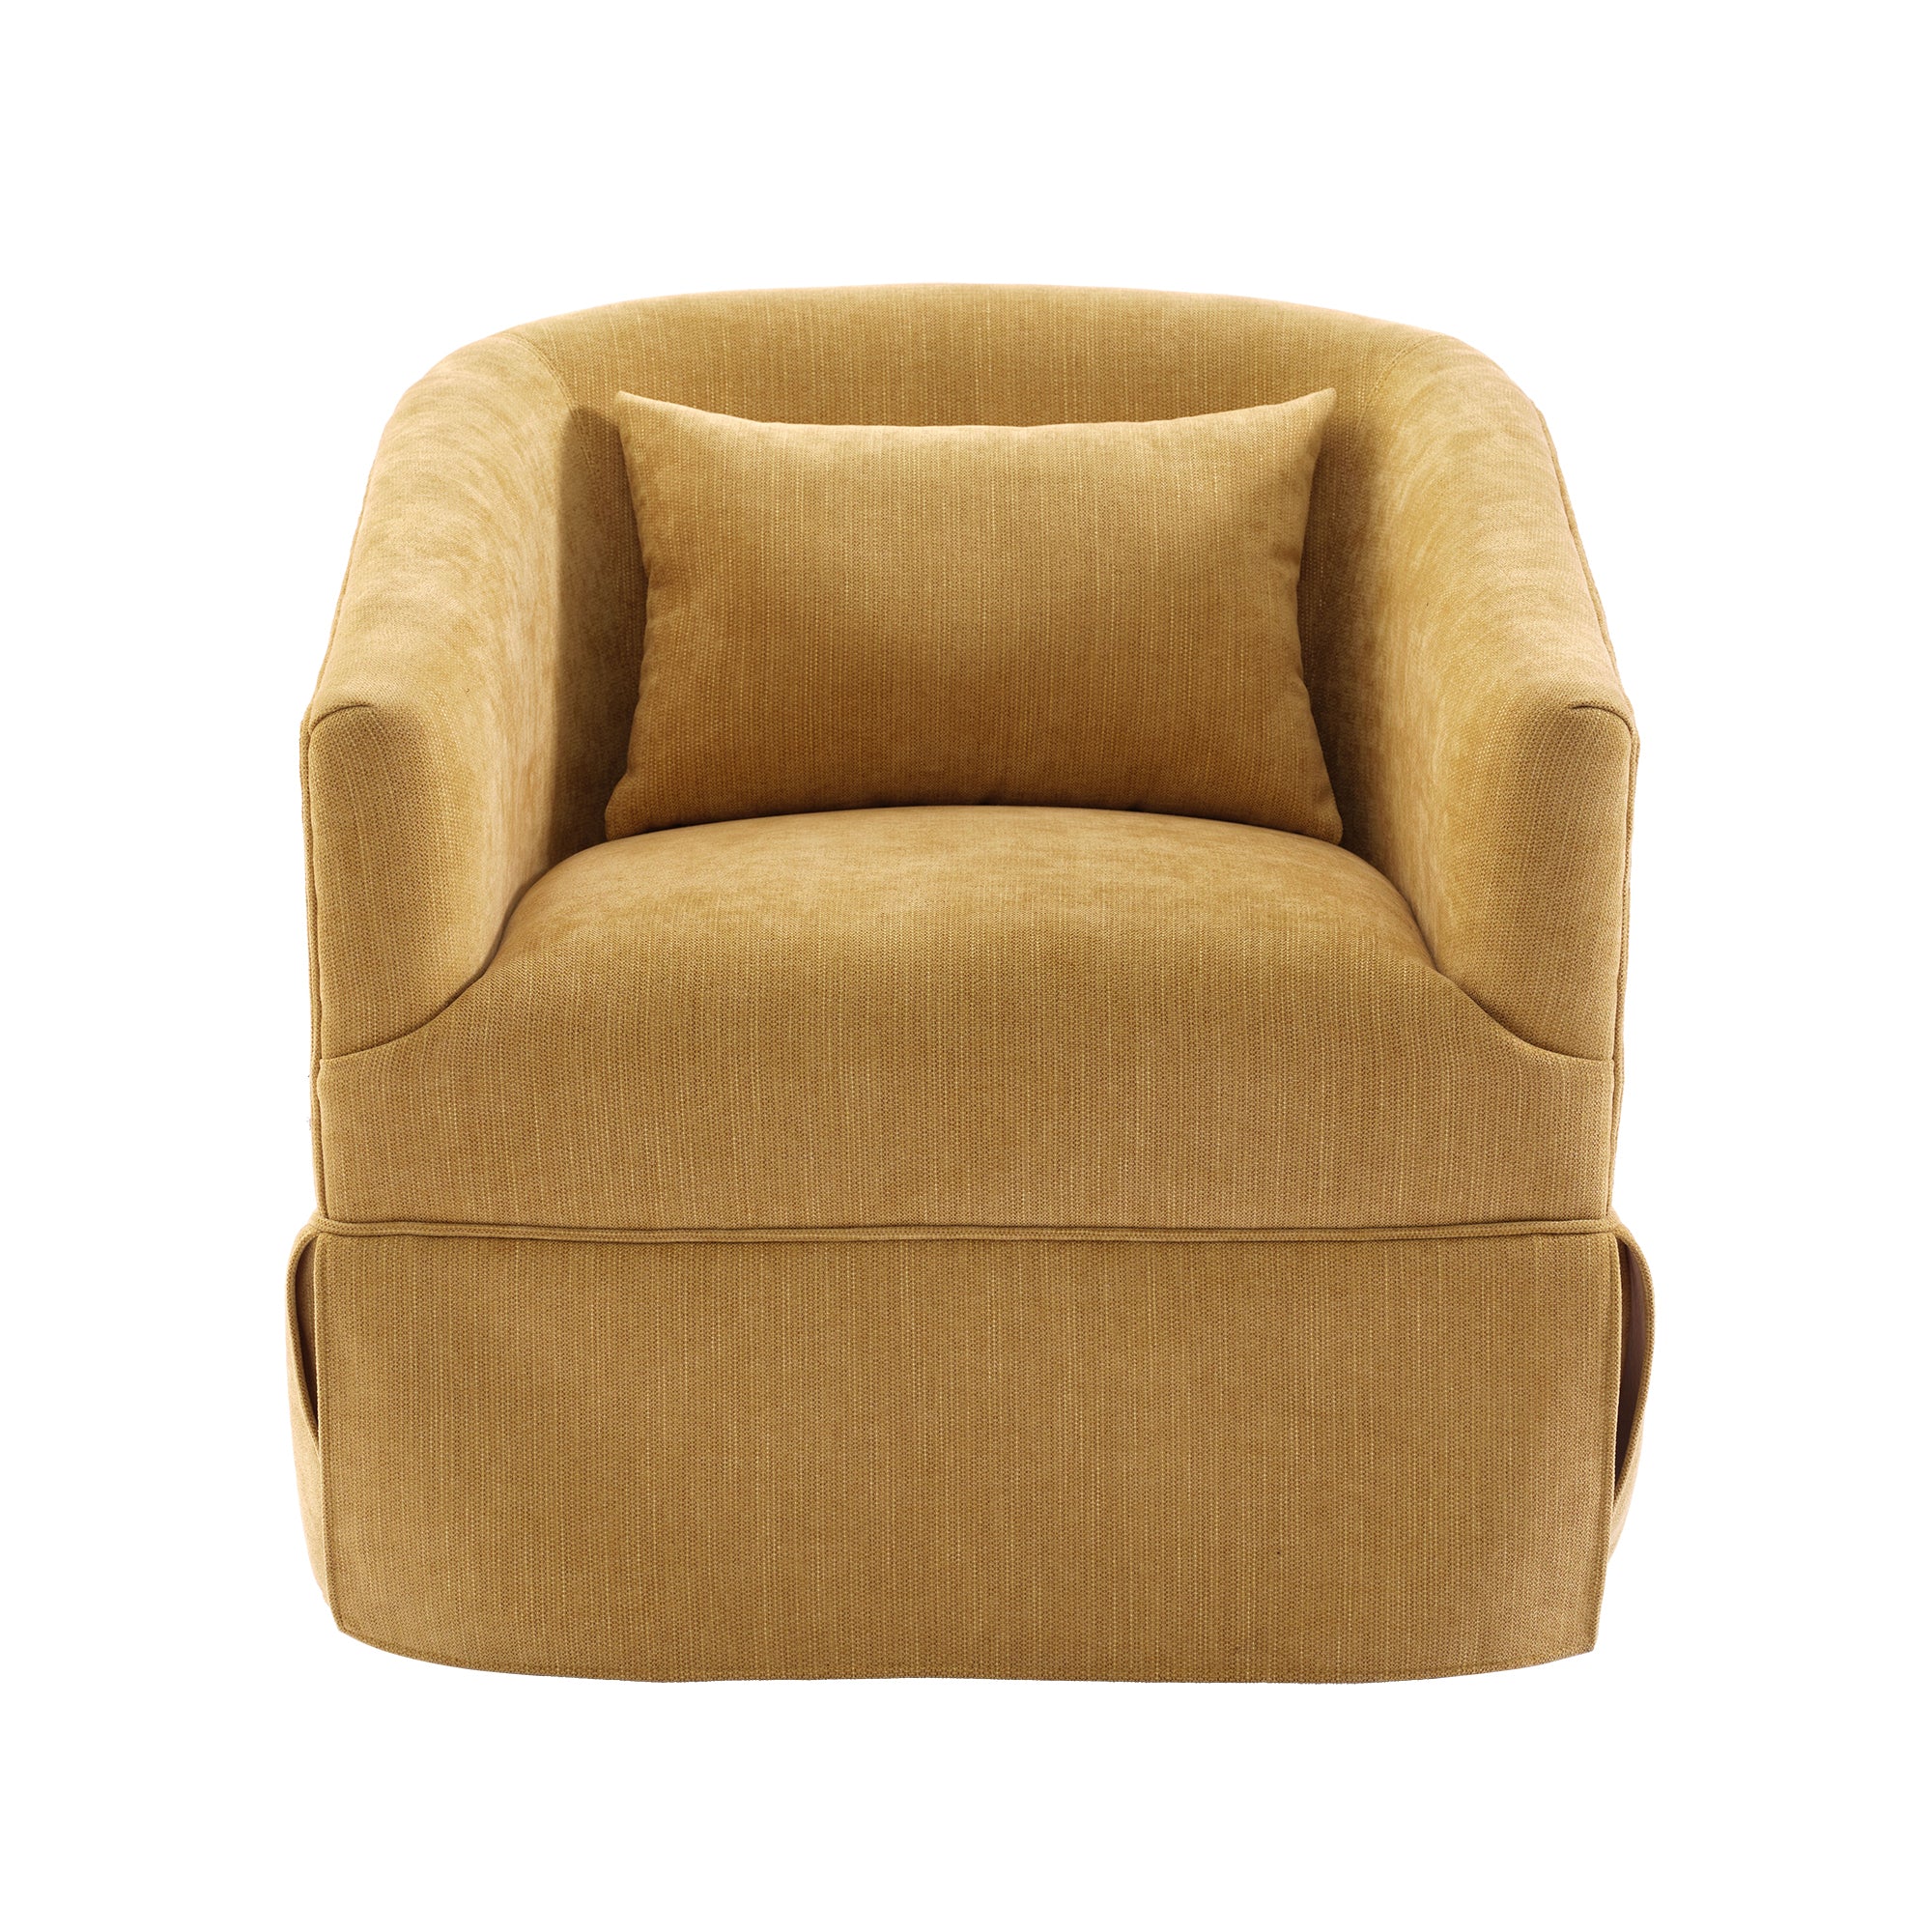 360 degree Swivel Accent Armchair Linen Blend MUSTED mustard yellow-upholstered